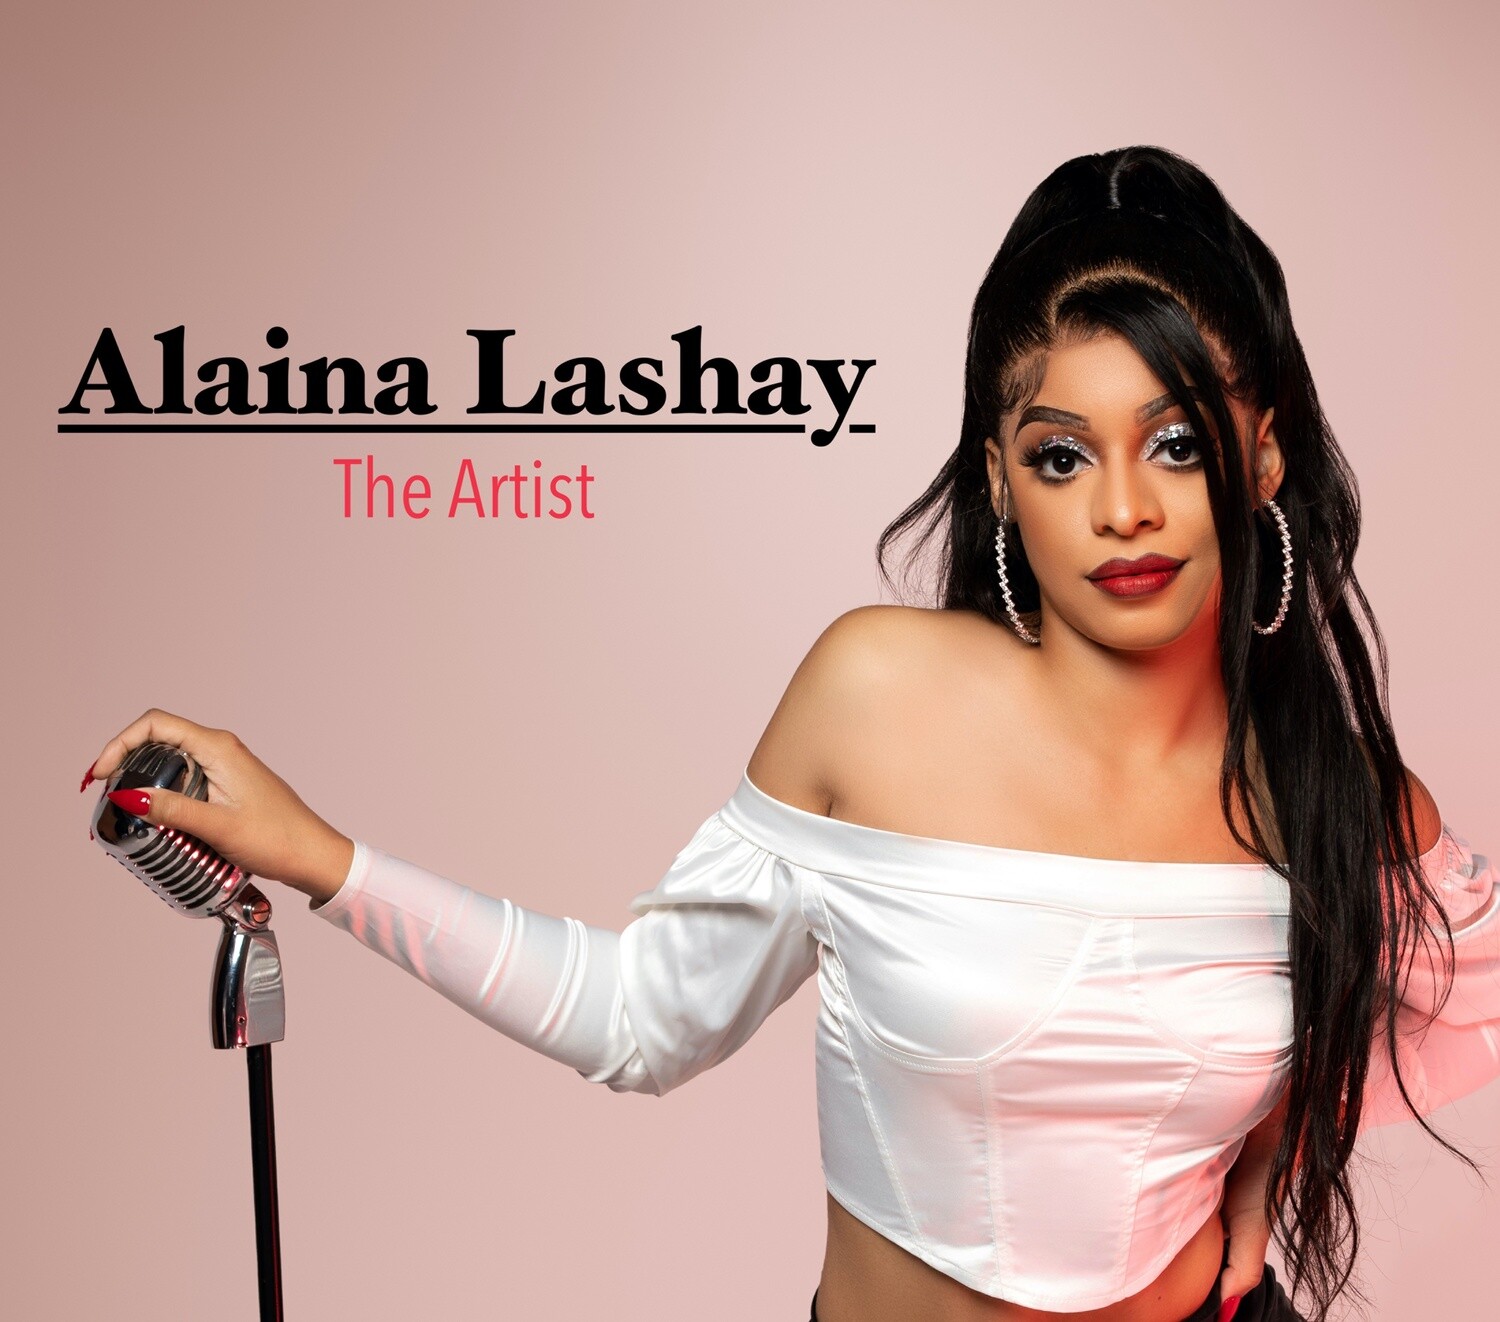 Alaina Lashay "The Artist" -  A Hard Copy 10 song. (CD)
These Songs Will Not Be Available any where else.